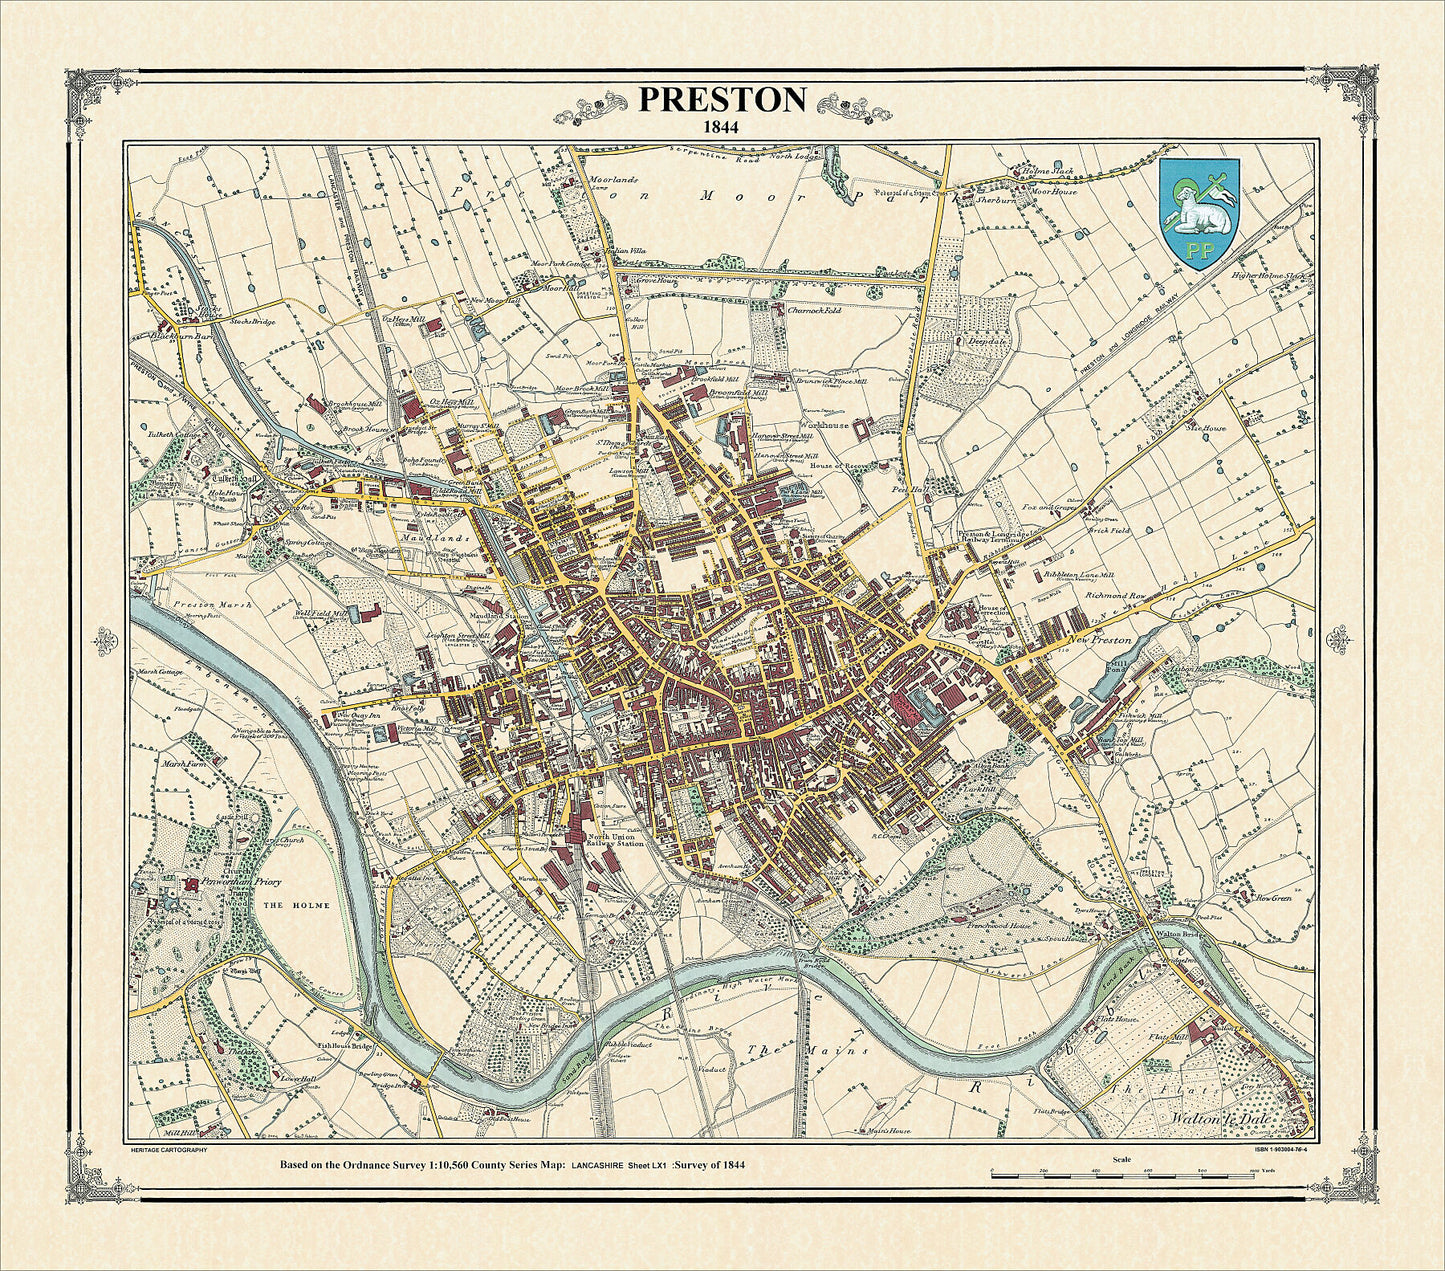 Coloured Victorian map of Preston in 1844 by Peter J Adams of Heritage Cartography